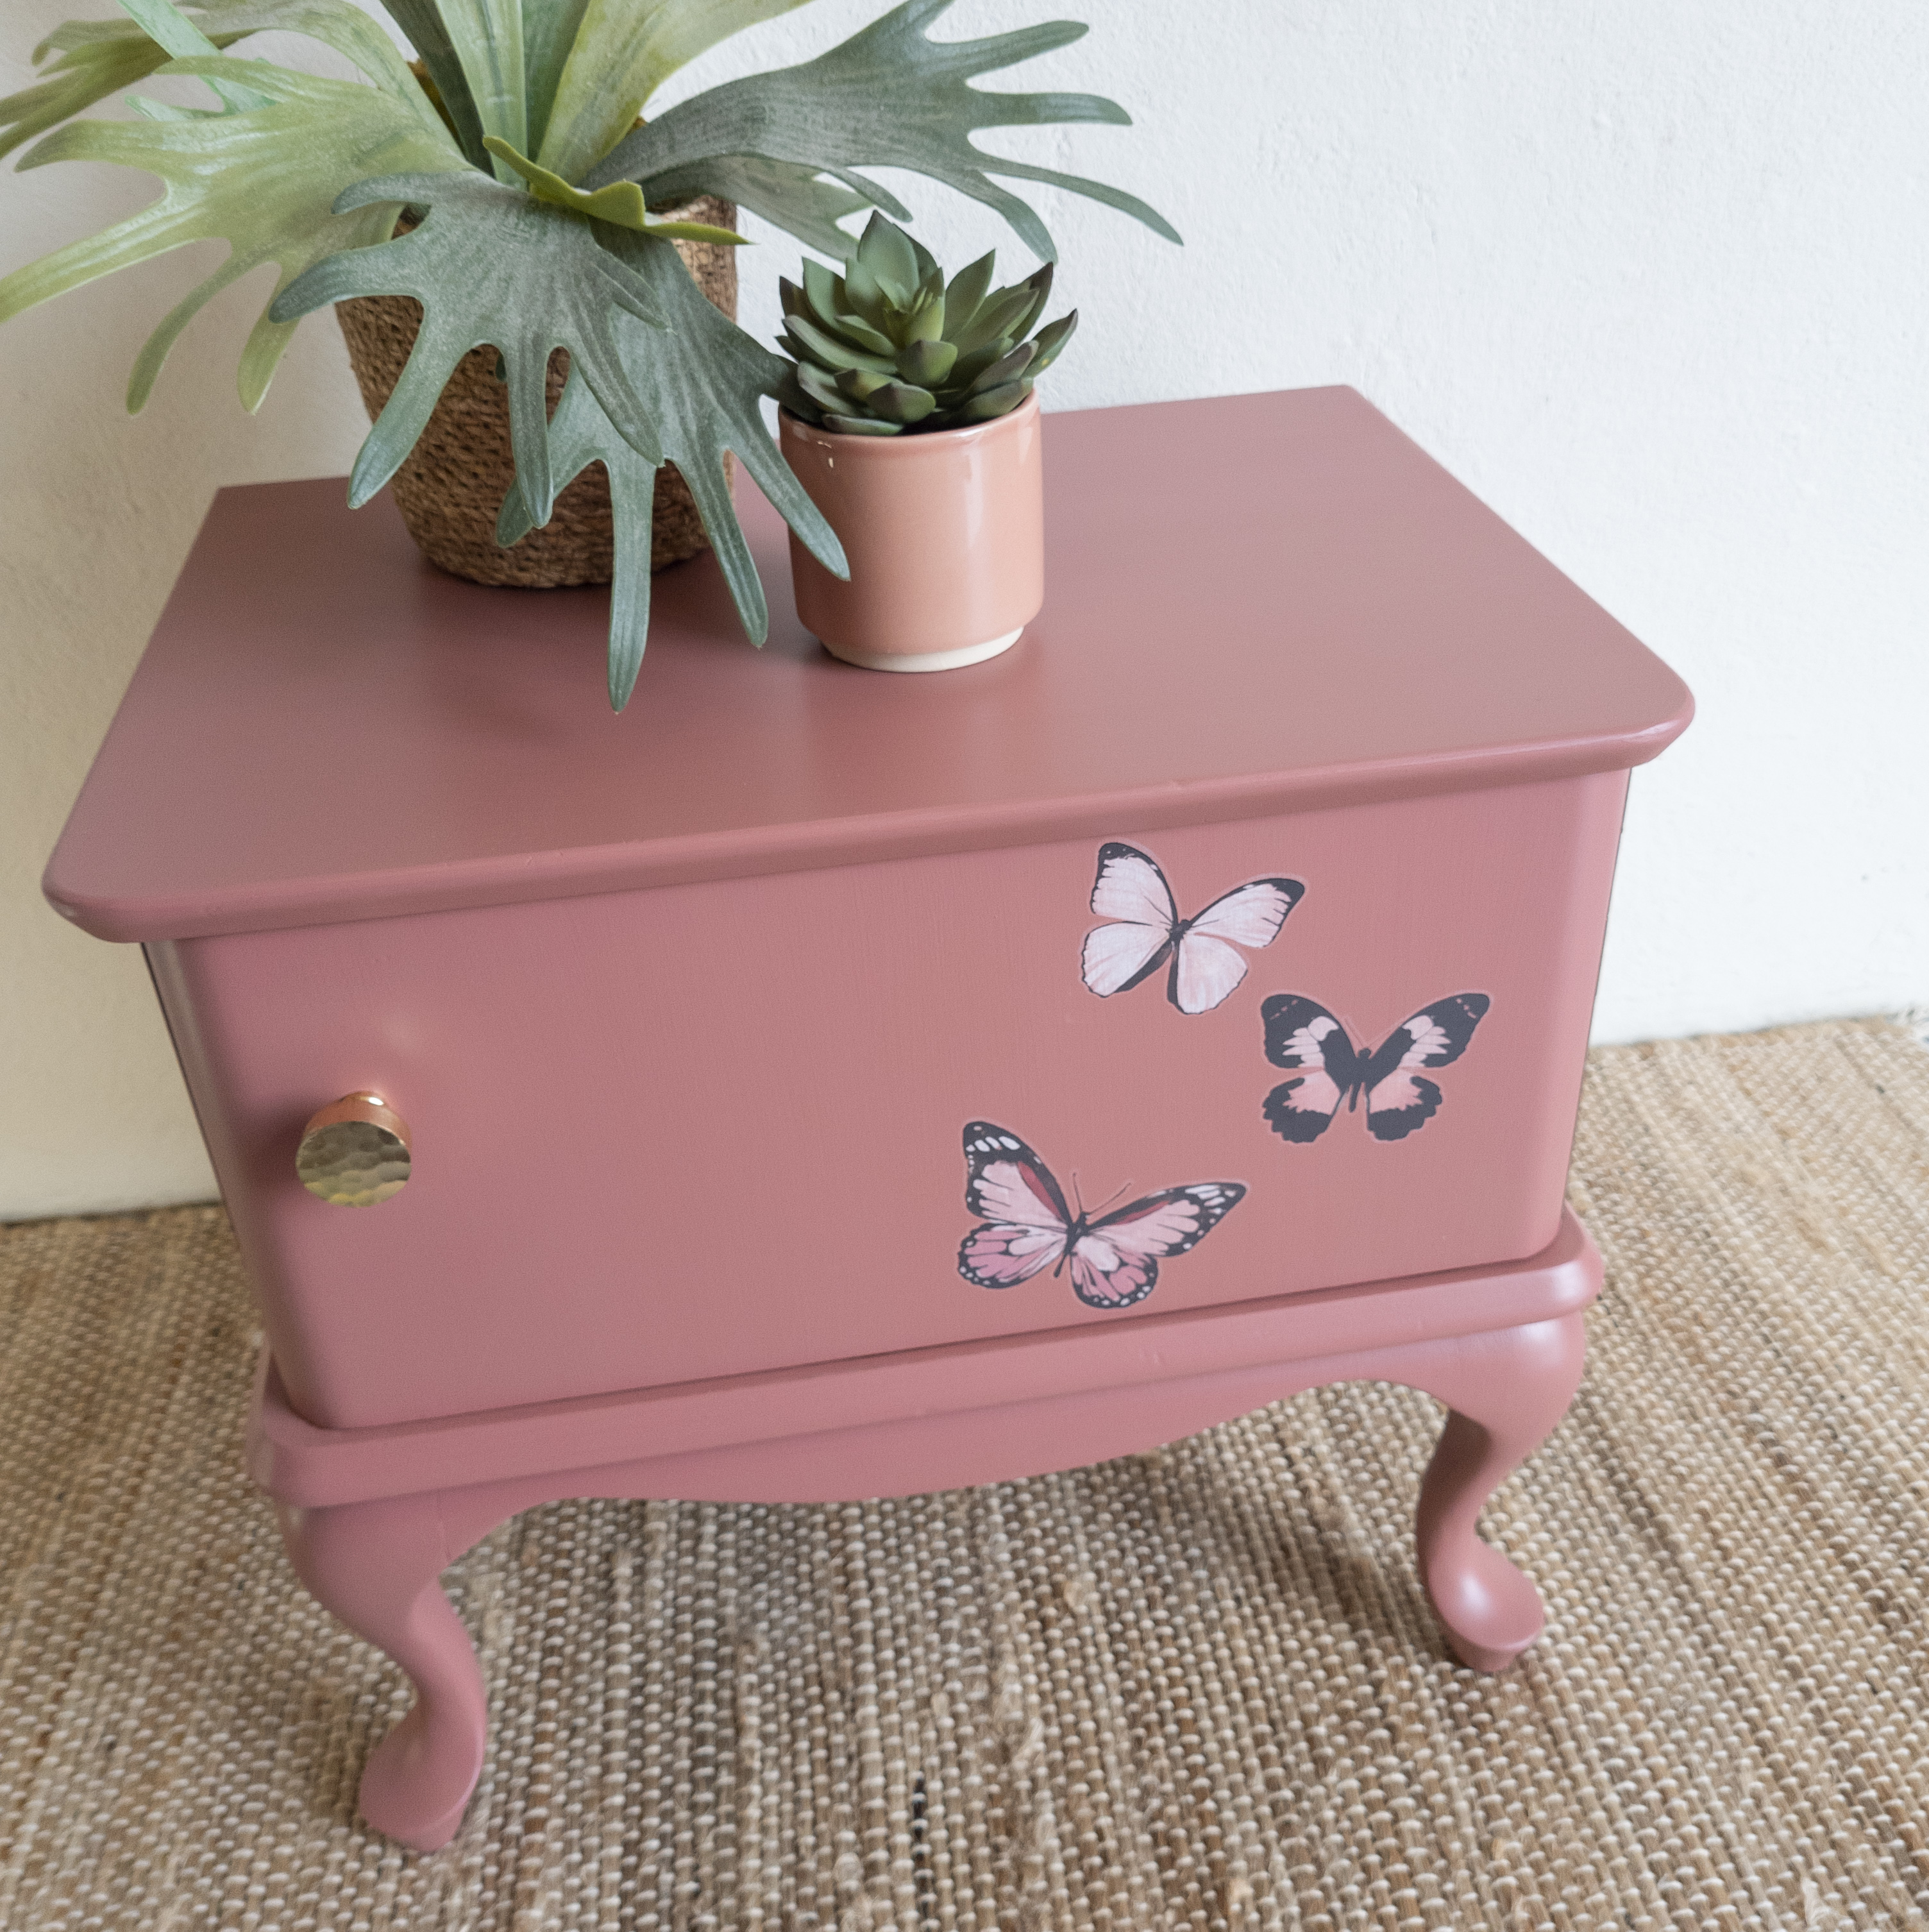 nachtkastje butterfly vlinders. Enchanted Echinacea Fusion Mineral Paint goed gestyled brielle